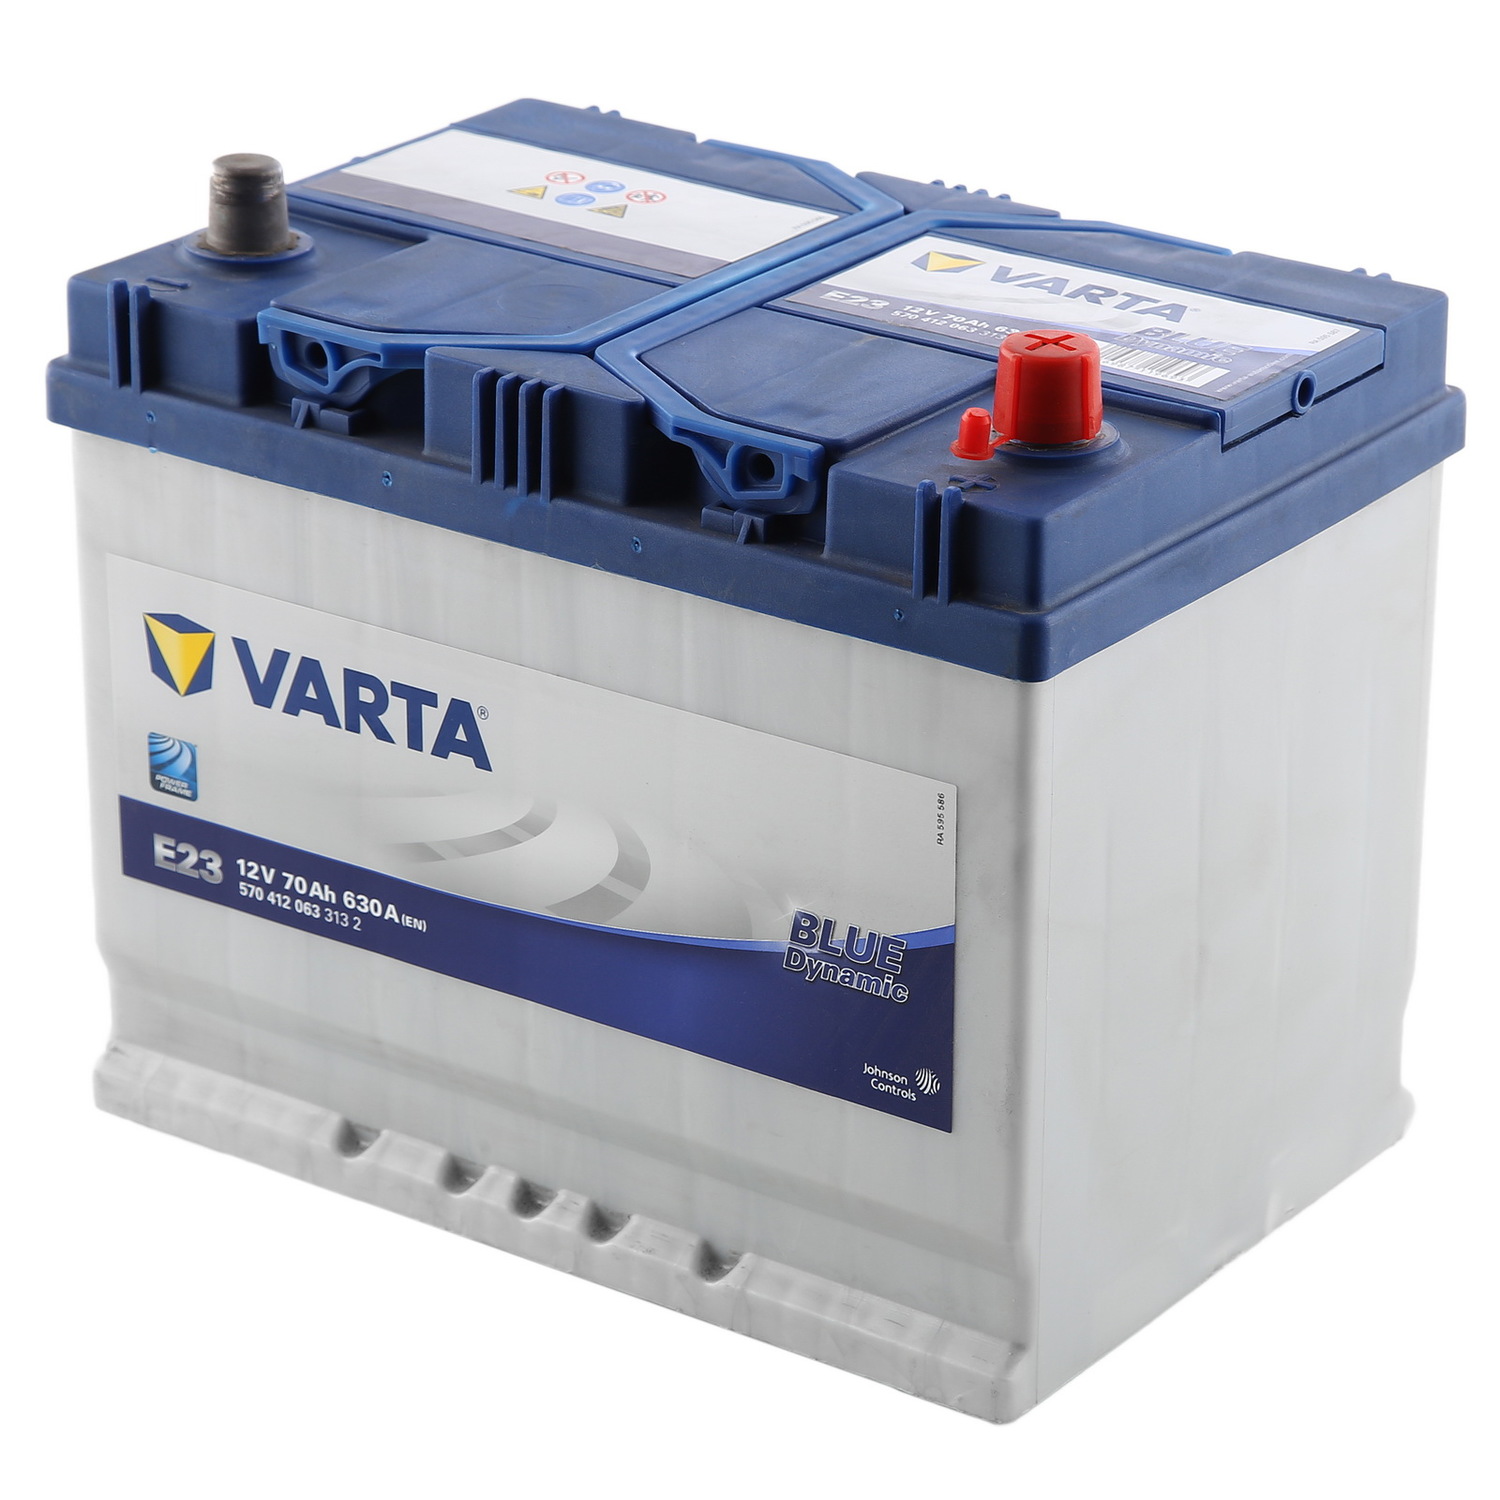 <span style="font-weight: bold;">VARTA 70 a\h&nbsp;</span>